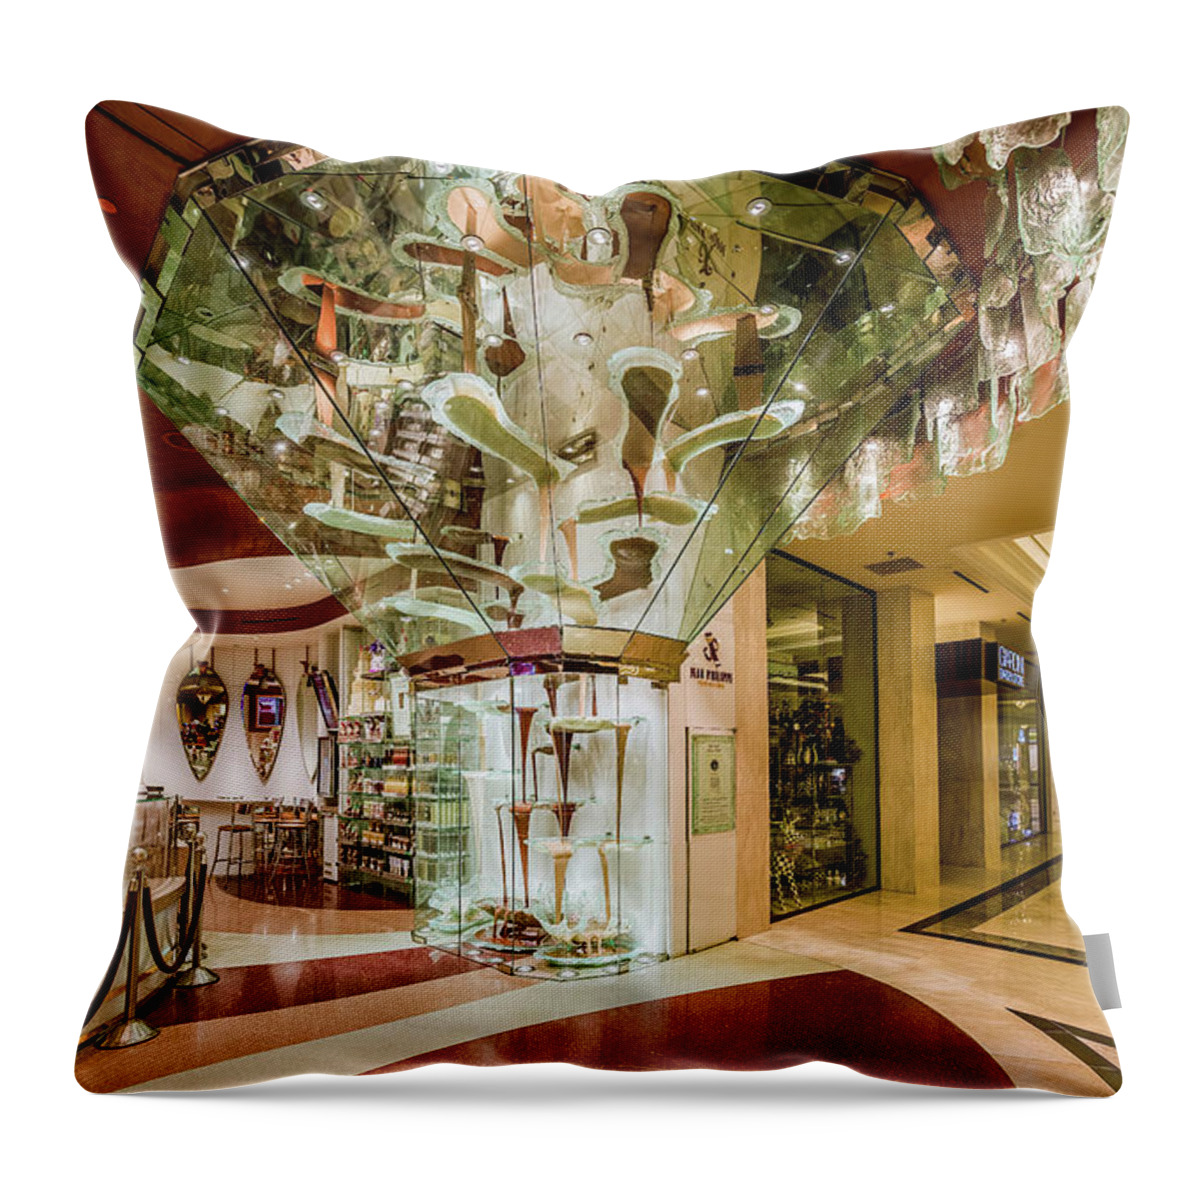 Jean Philippe's patisserie - World's Largest Chocolate Fountain in the  Bellagio Throw Pillow by Aloha Art - Fine Art America